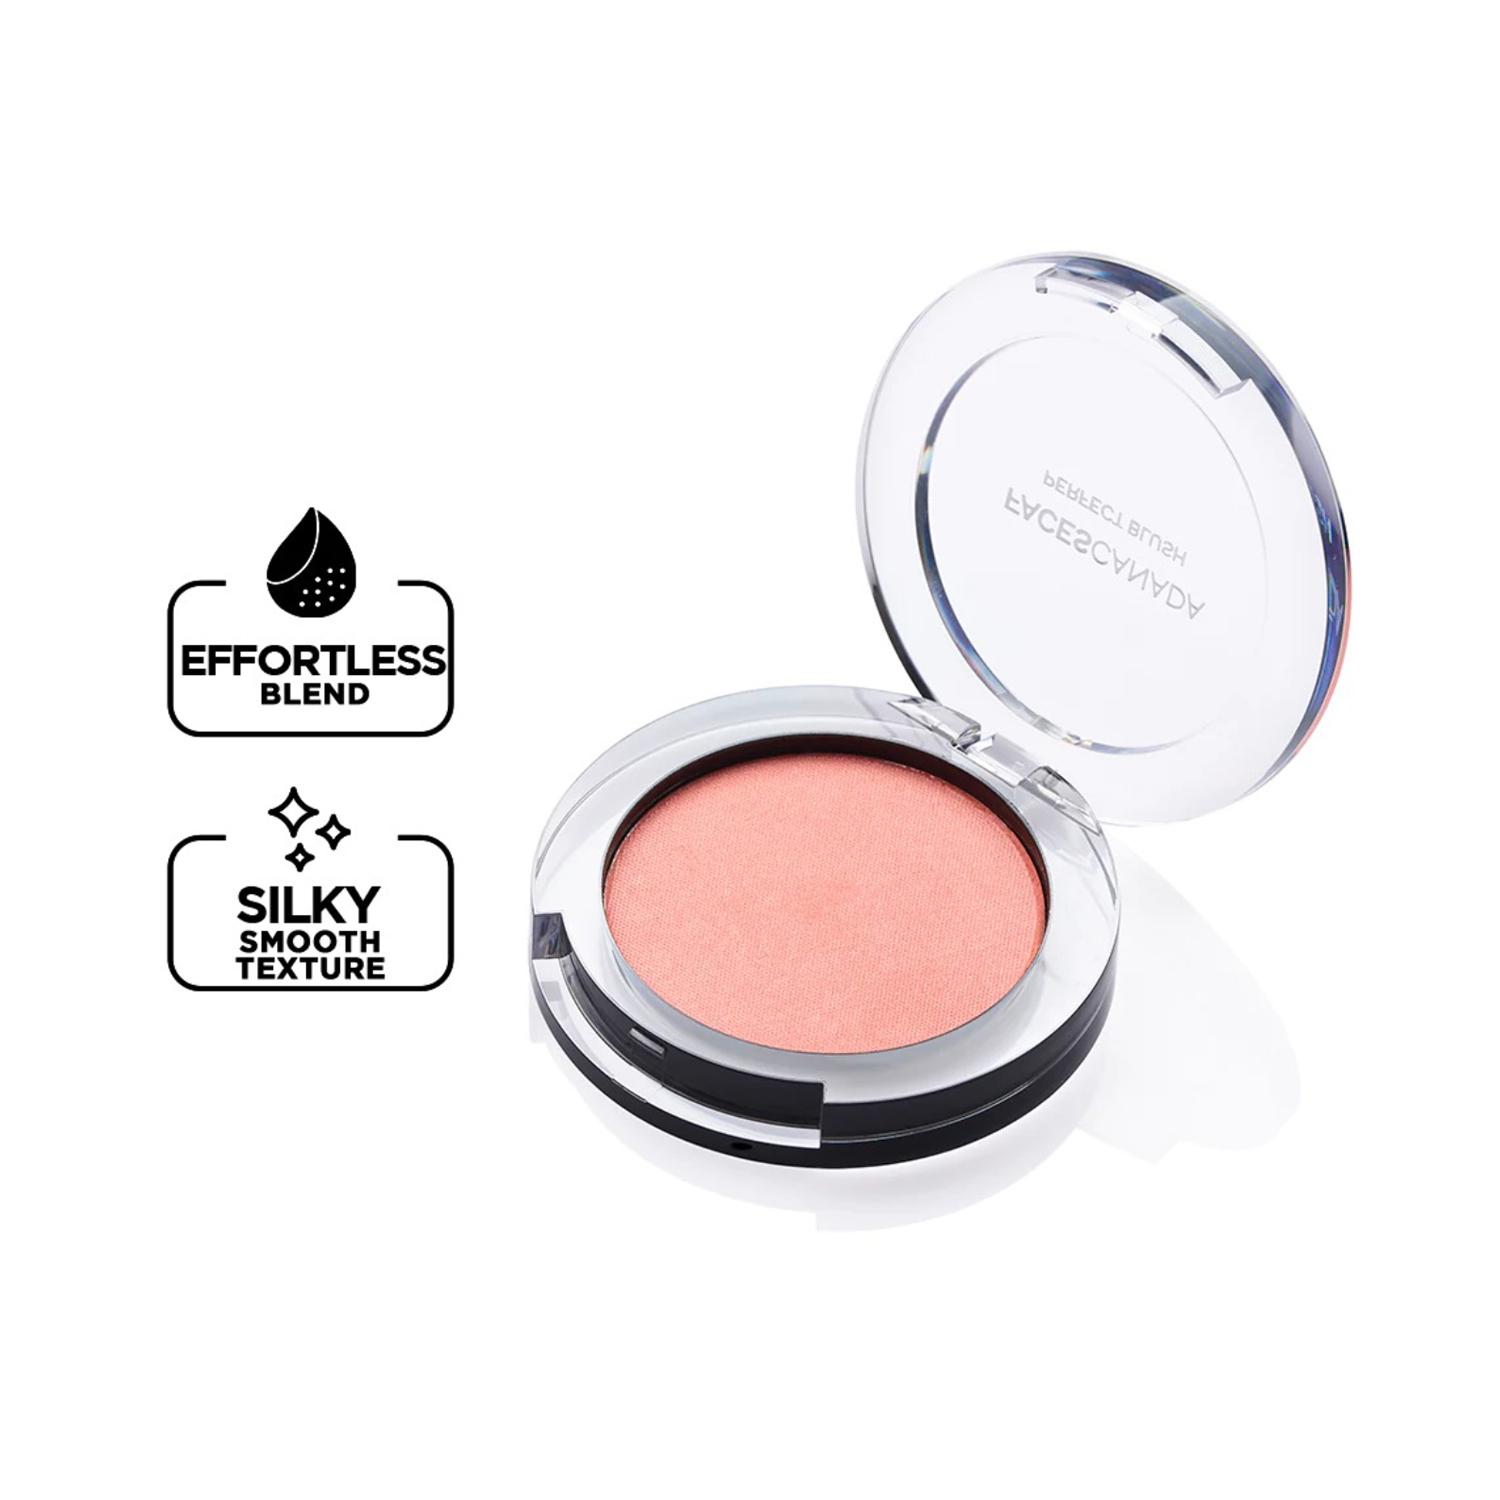 Faces Canada | Faces Canada Perfecting Blush - Cocktail Peach 04, Lightweight & Long Lasting (5 g)